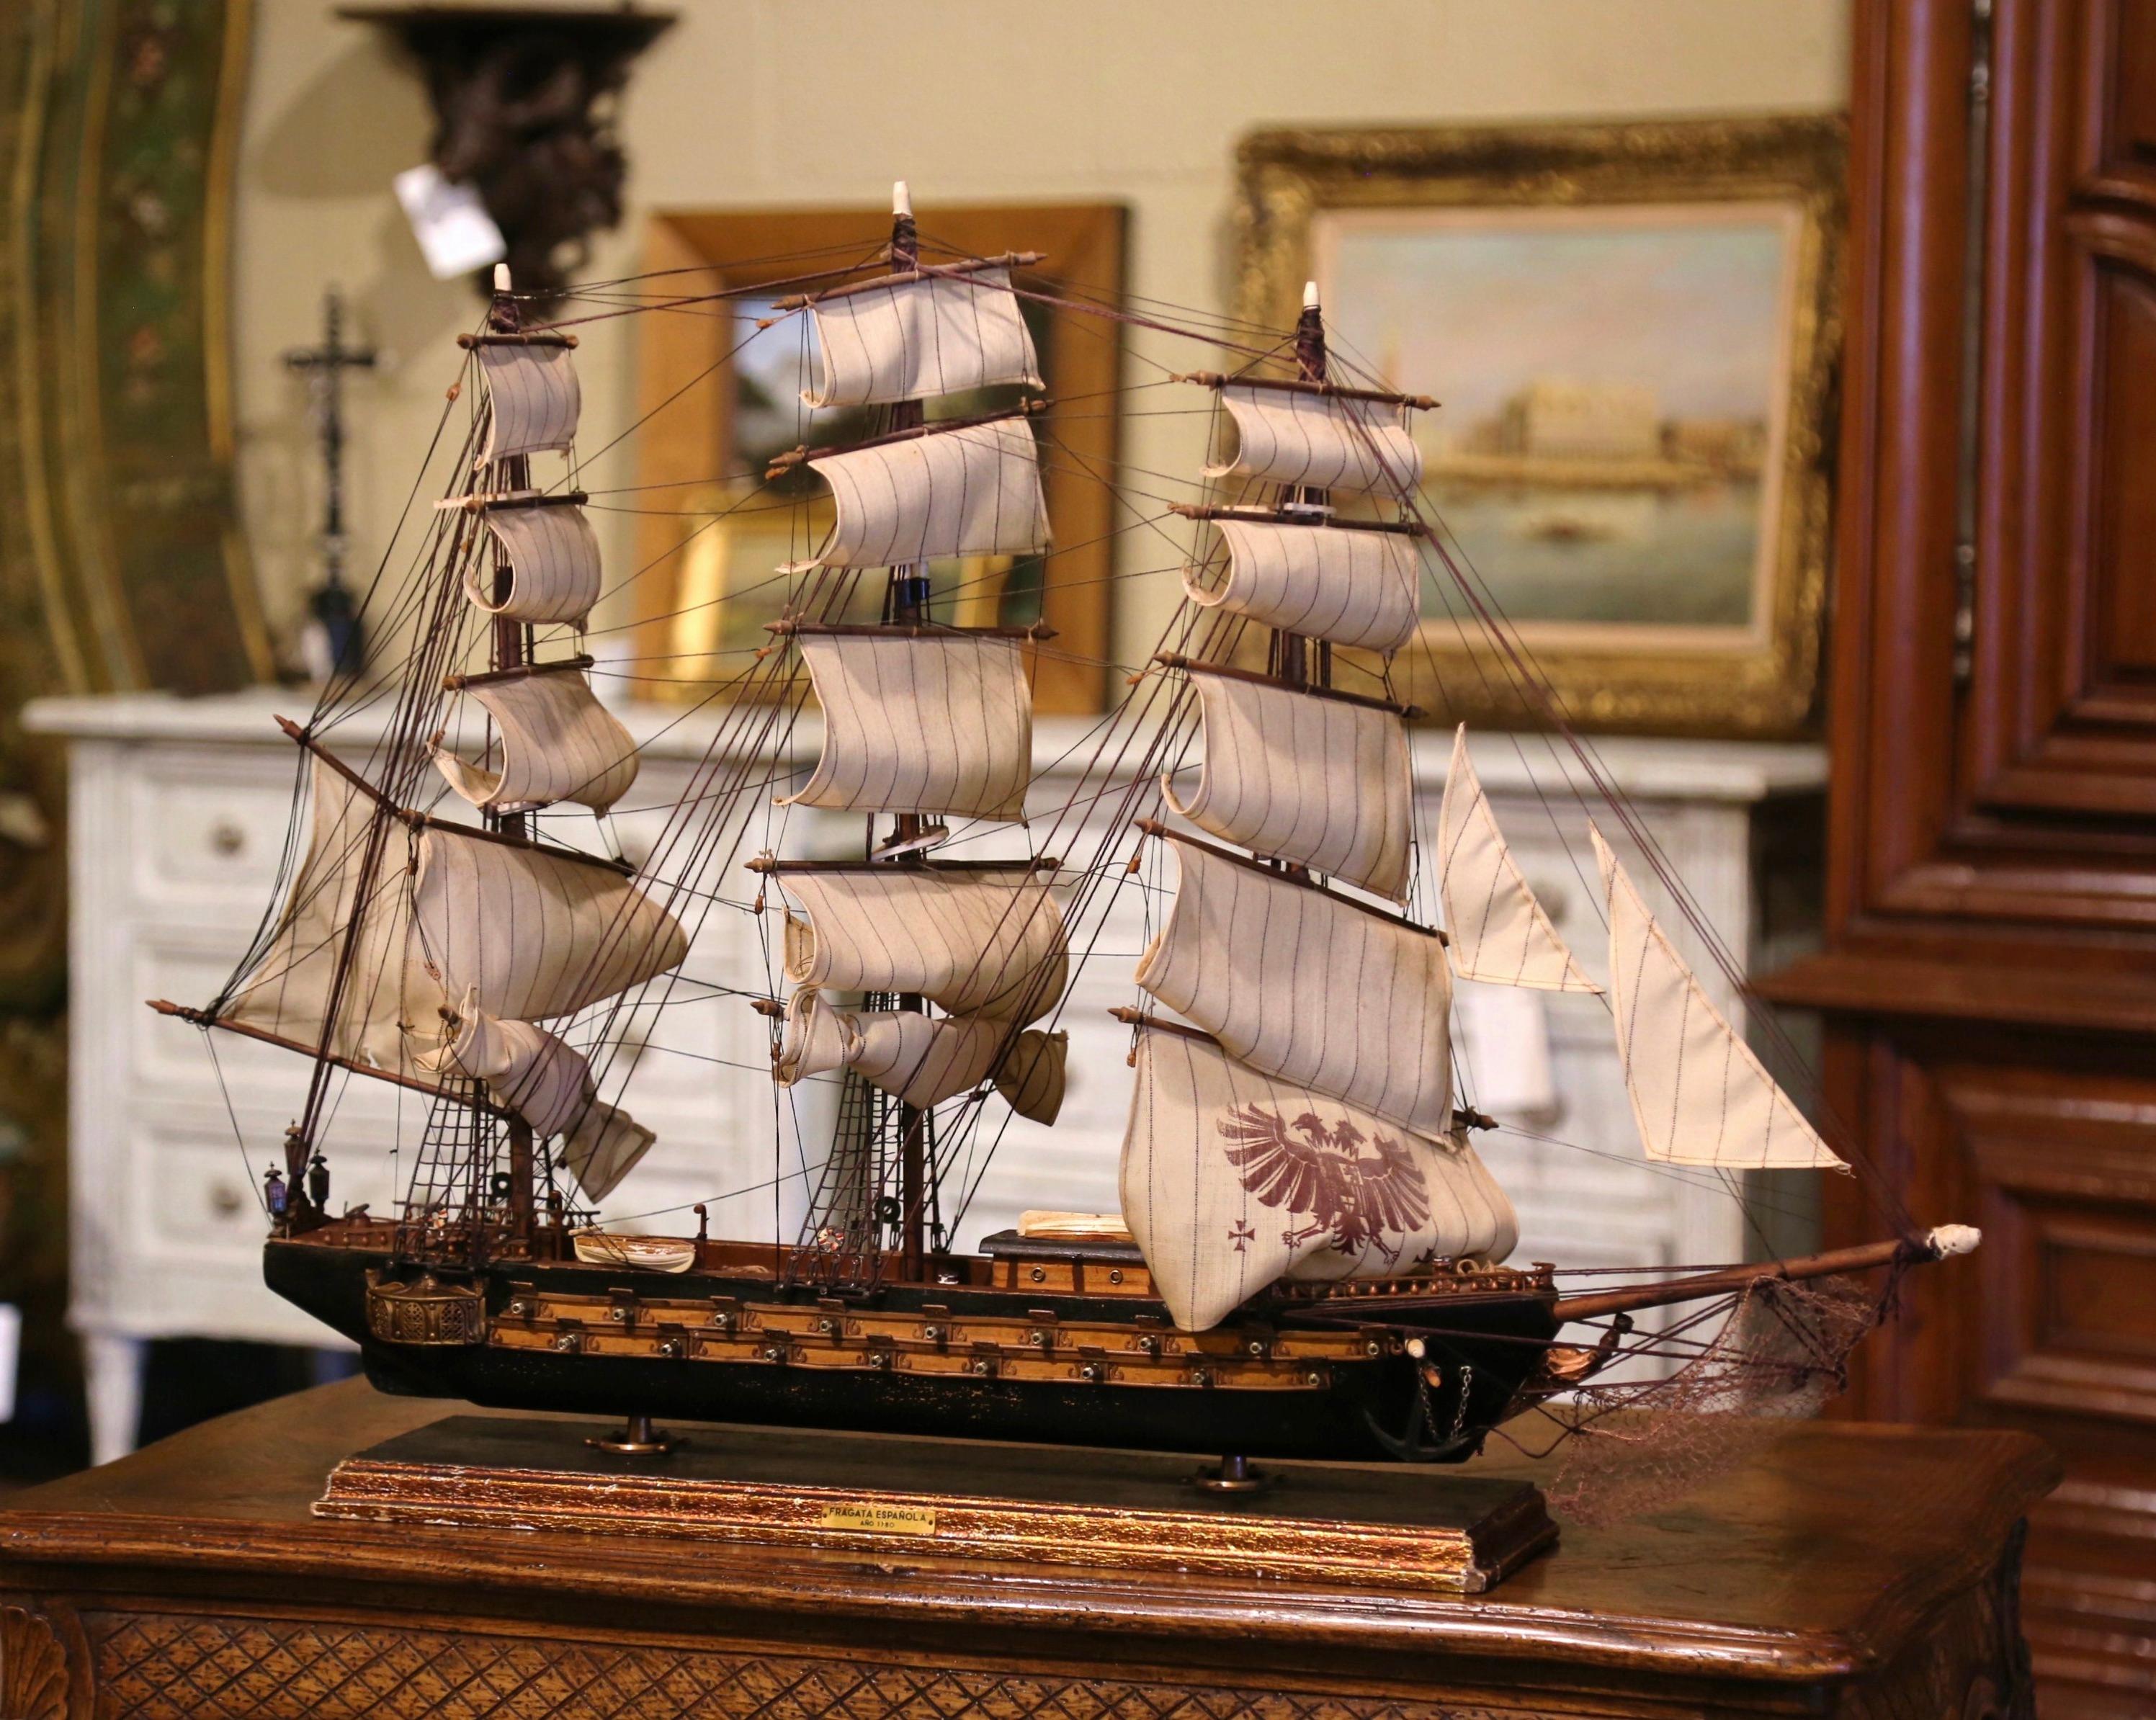 This elegant and majestic frigate model was crafted in Spain, circa 1950. Named 